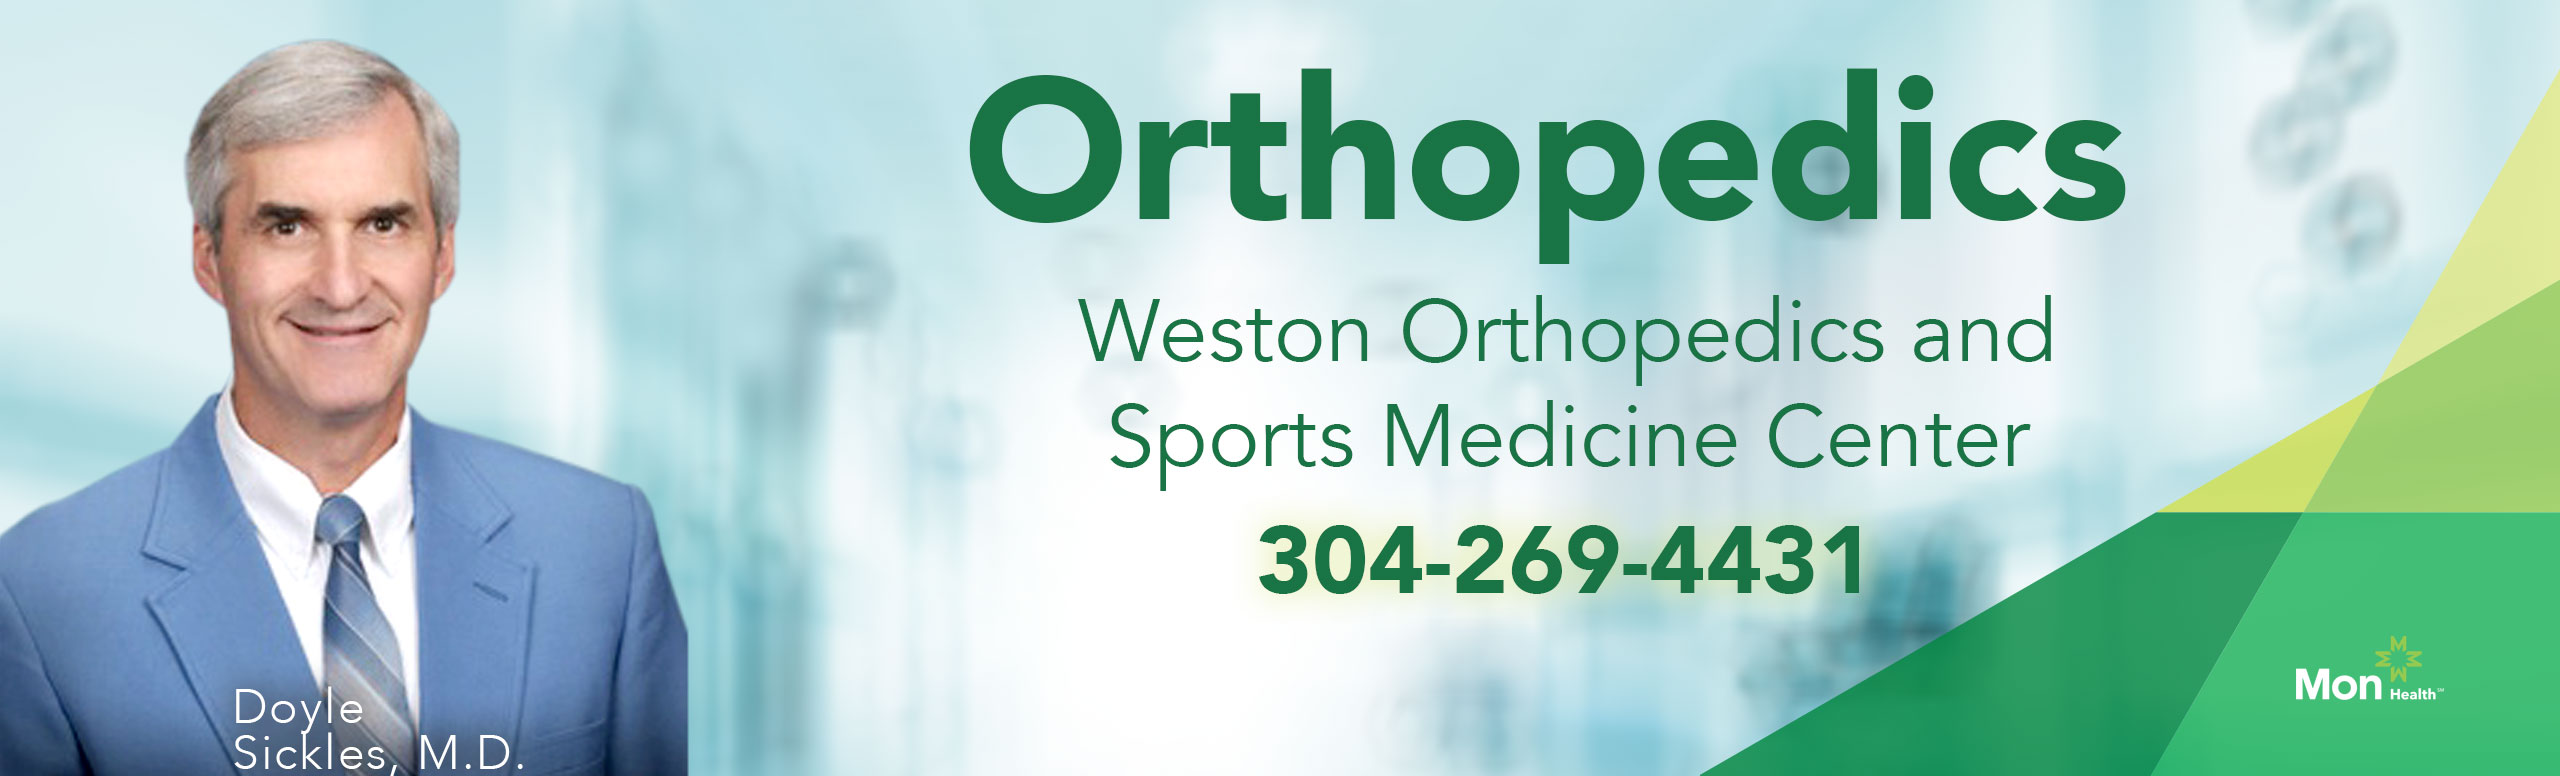 Banner picture of Dr. Doyle Sickles, M.D.
A contact number is listed for the Weston Orthopedic & Sports Center, 304-269-4431. Doctor Doyle Sickles